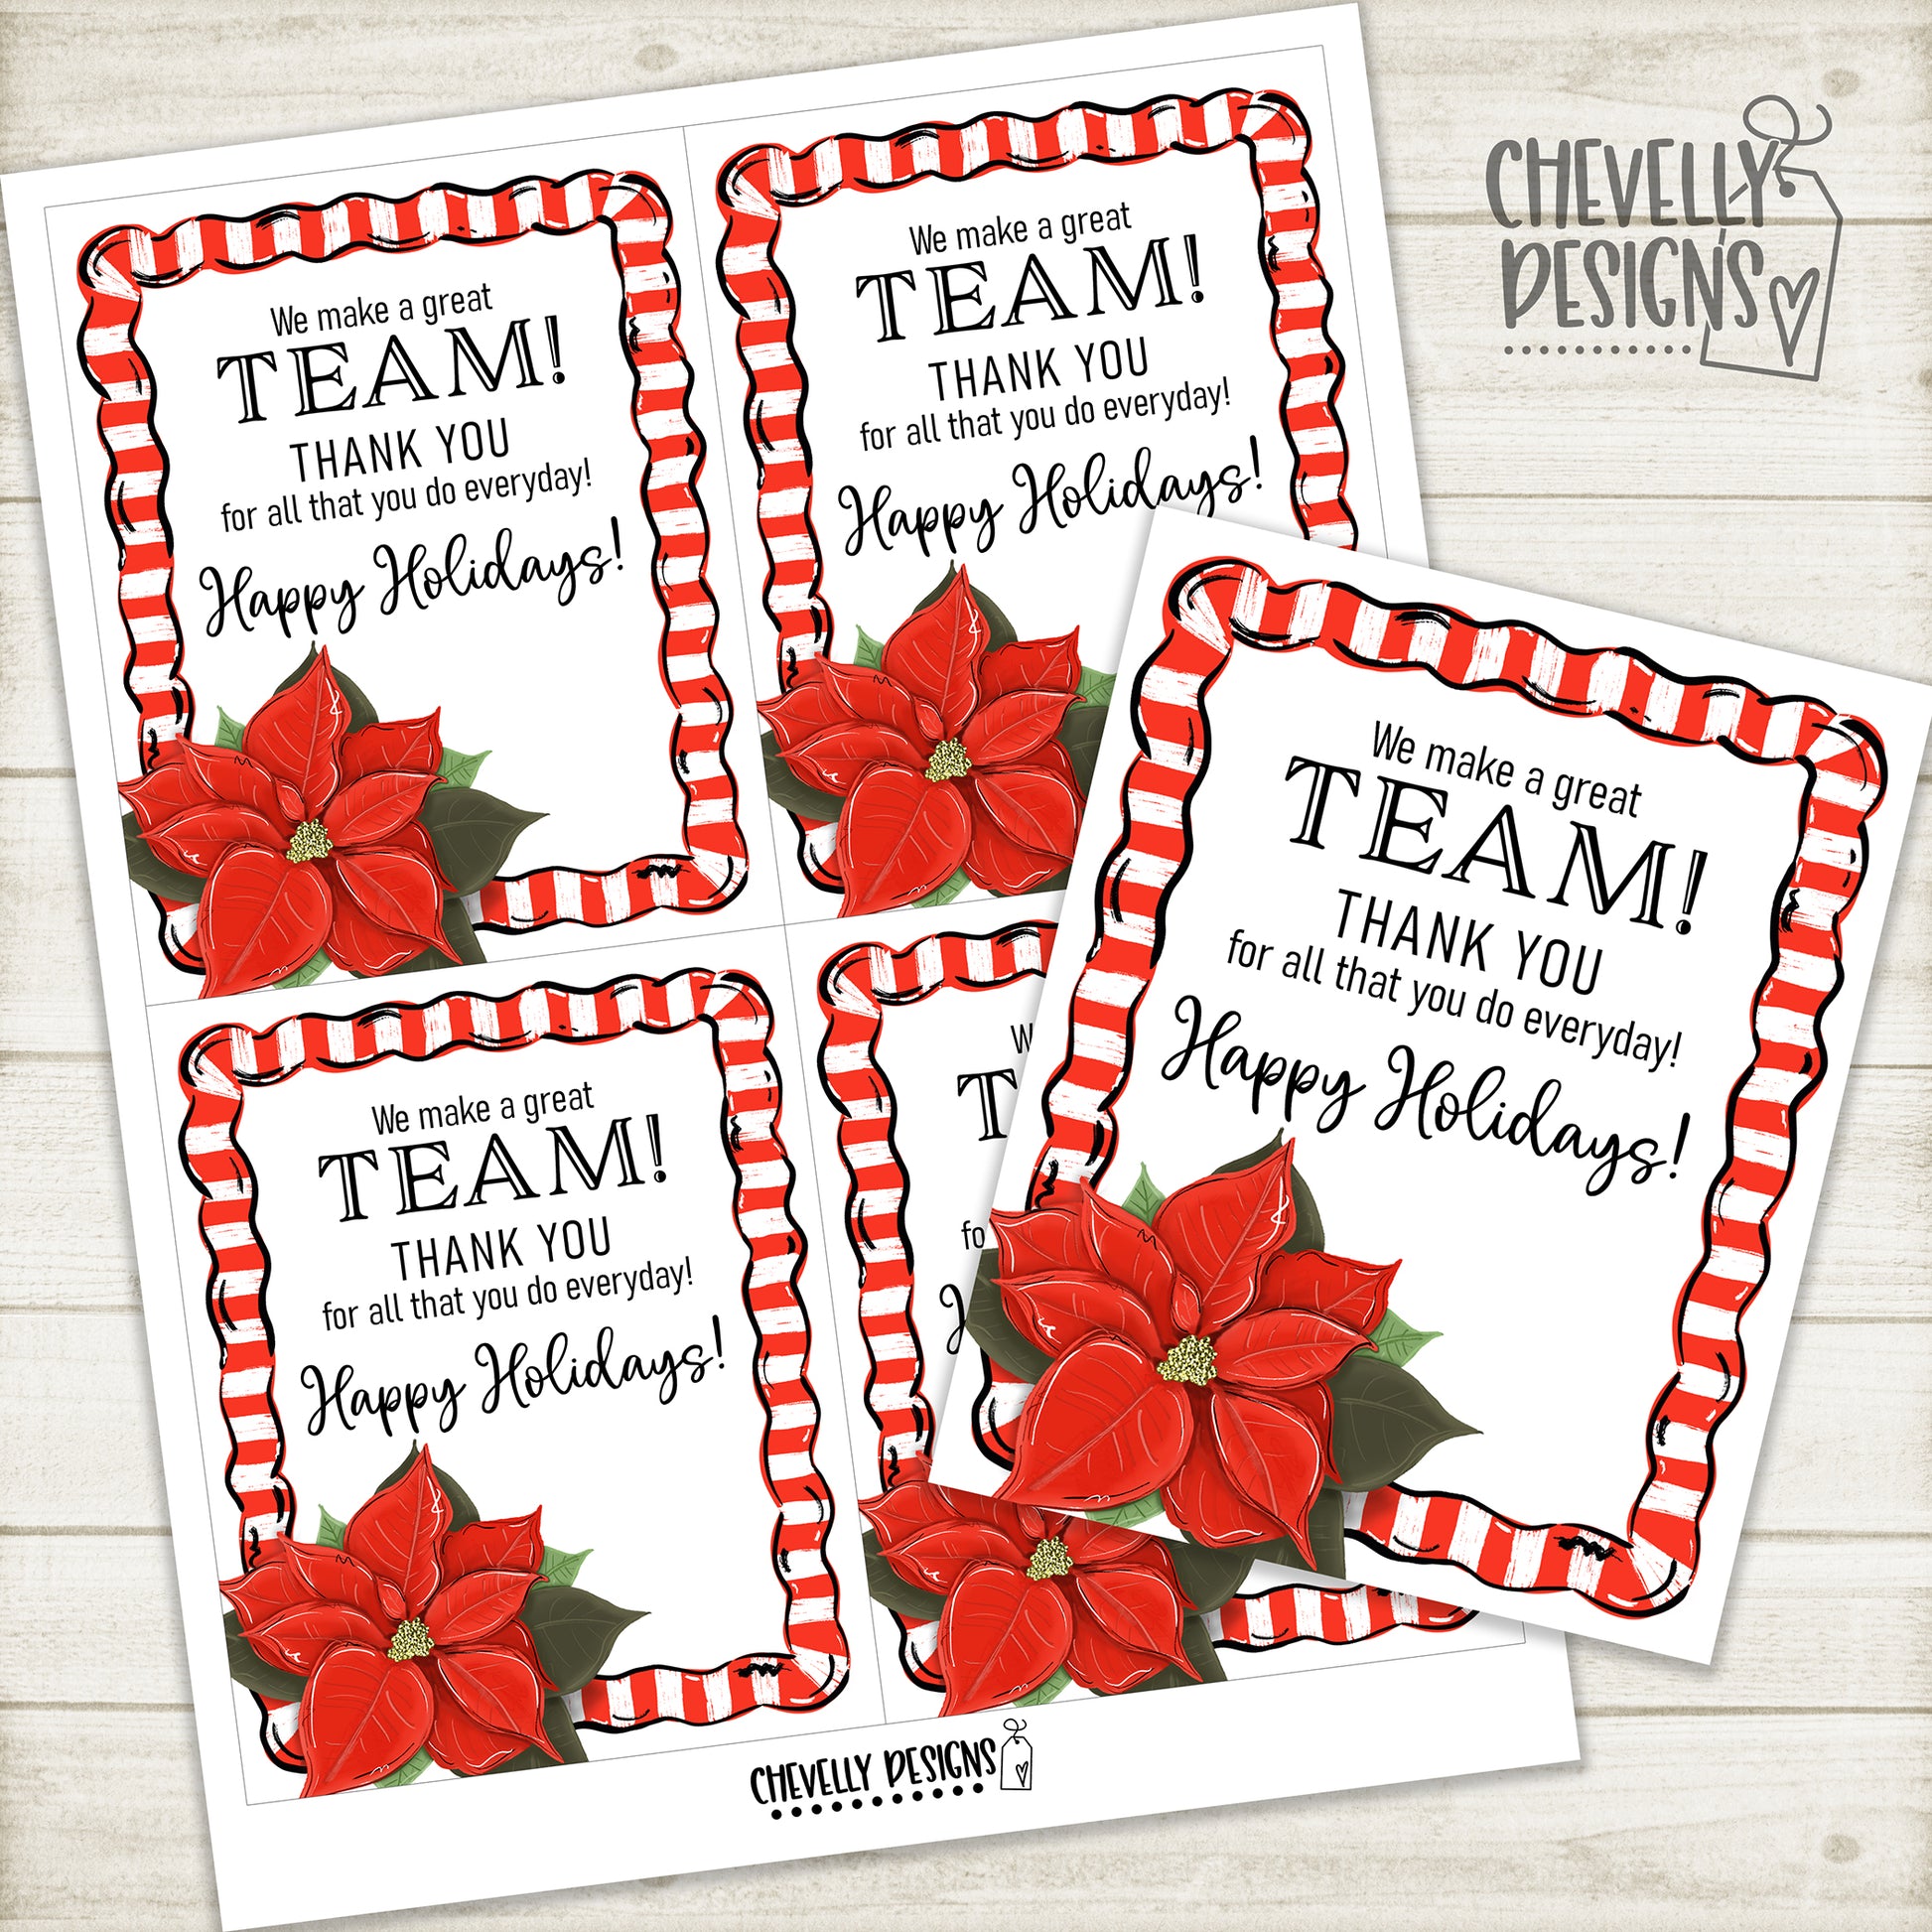 https://chevellydesigns.com/cdn/shop/products/HTX020a-candycanepoinsettia4x5WEB.jpg?v=1606934716&width=1946